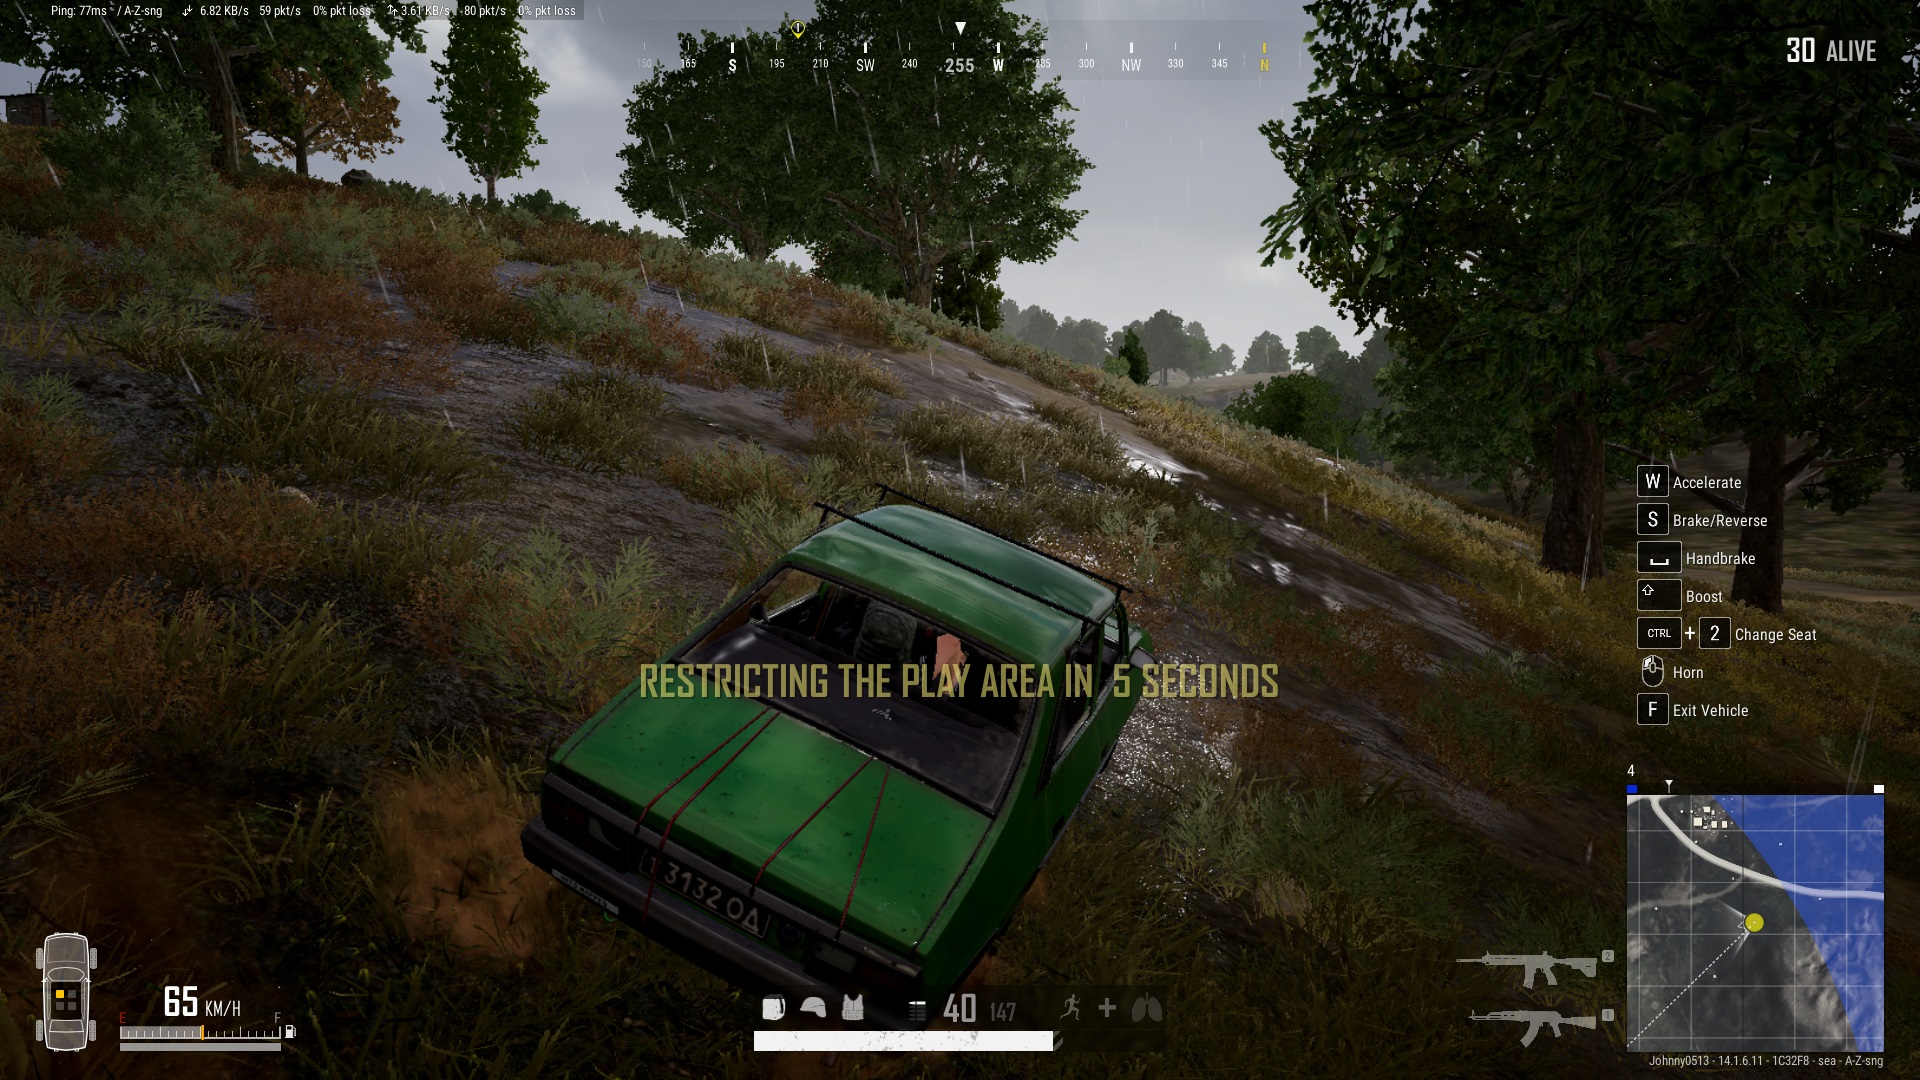 How to Switch Seats in a Vehicle in PUBG